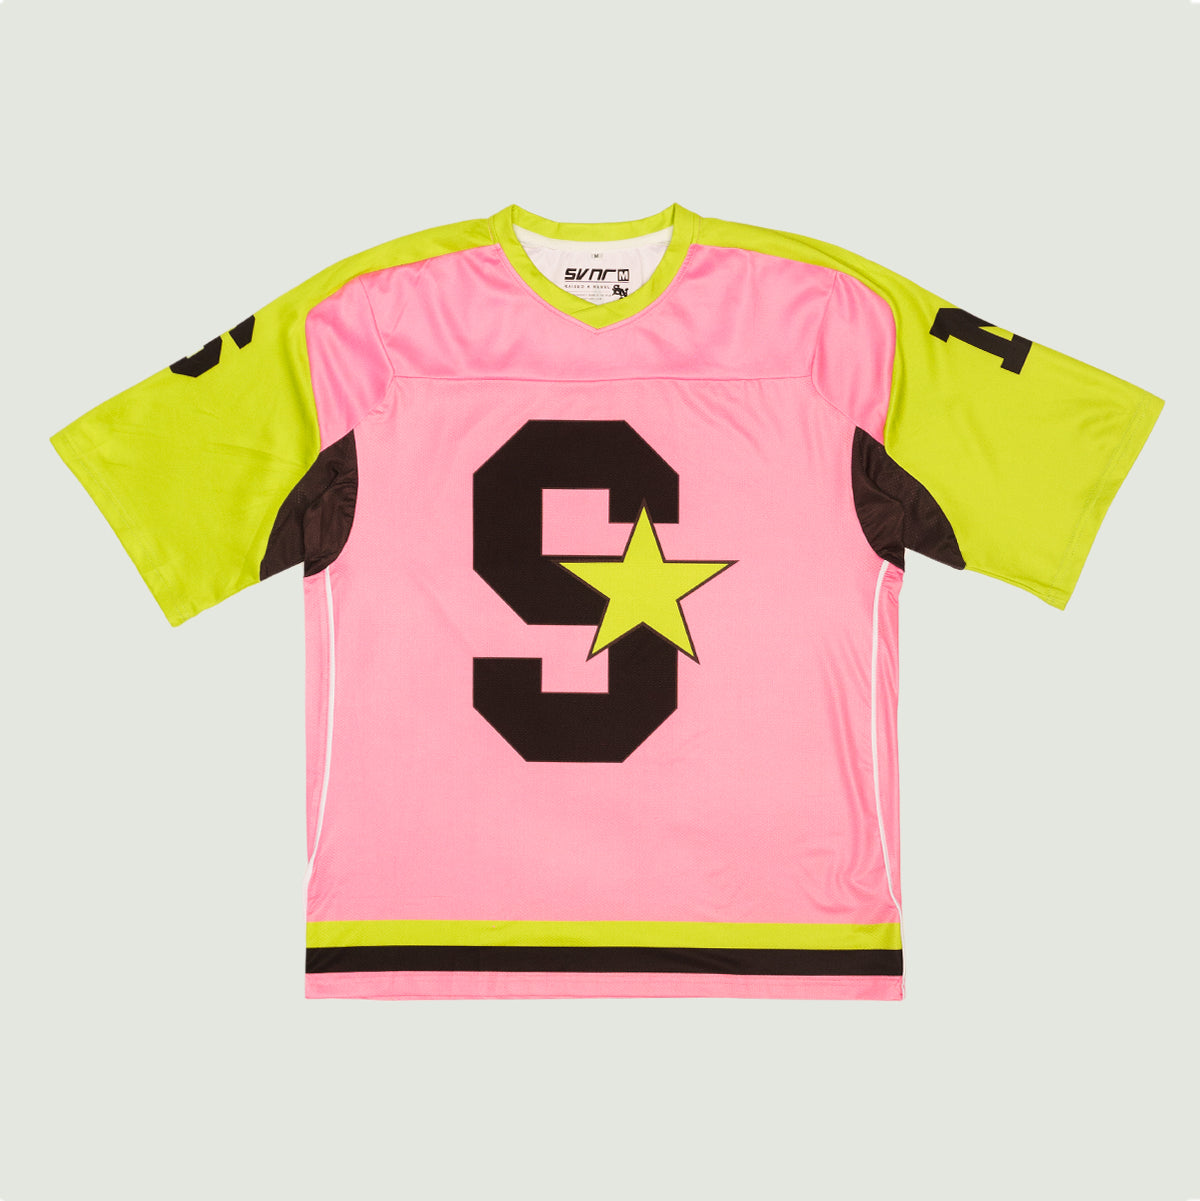 S STAR CLASSIC NFL JERSEY (Pink)